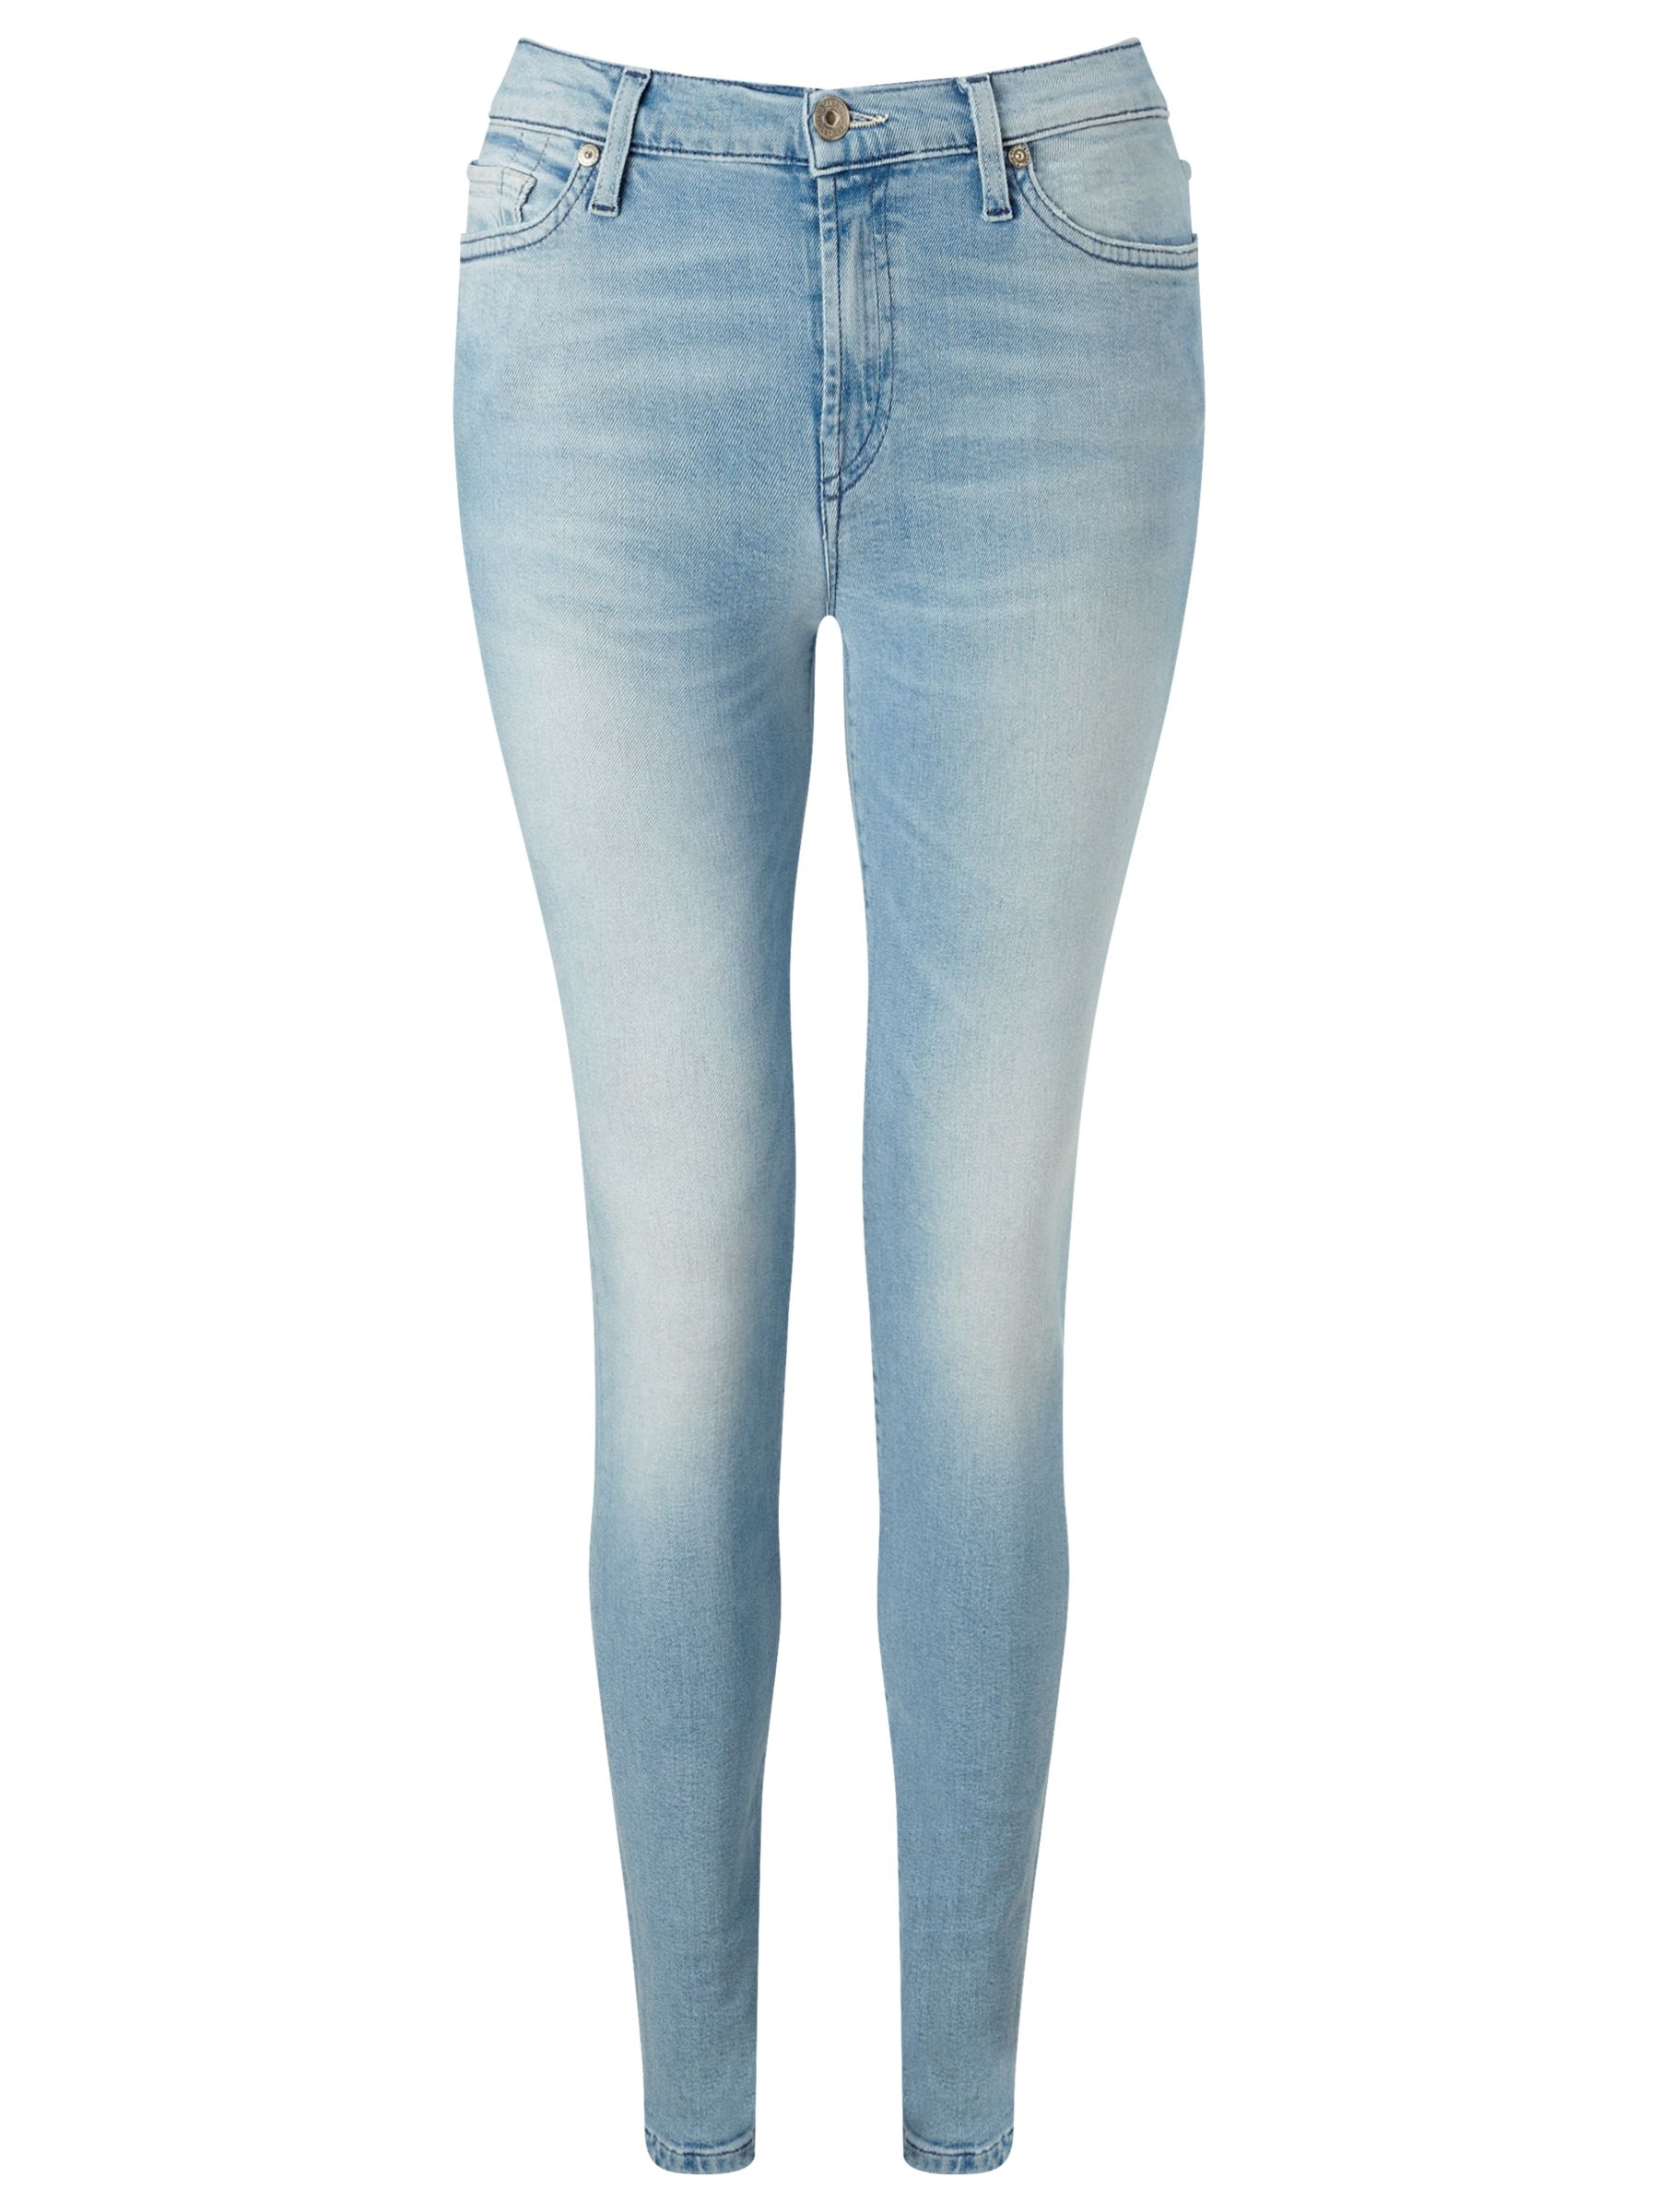 7 for all mankind baby jeans